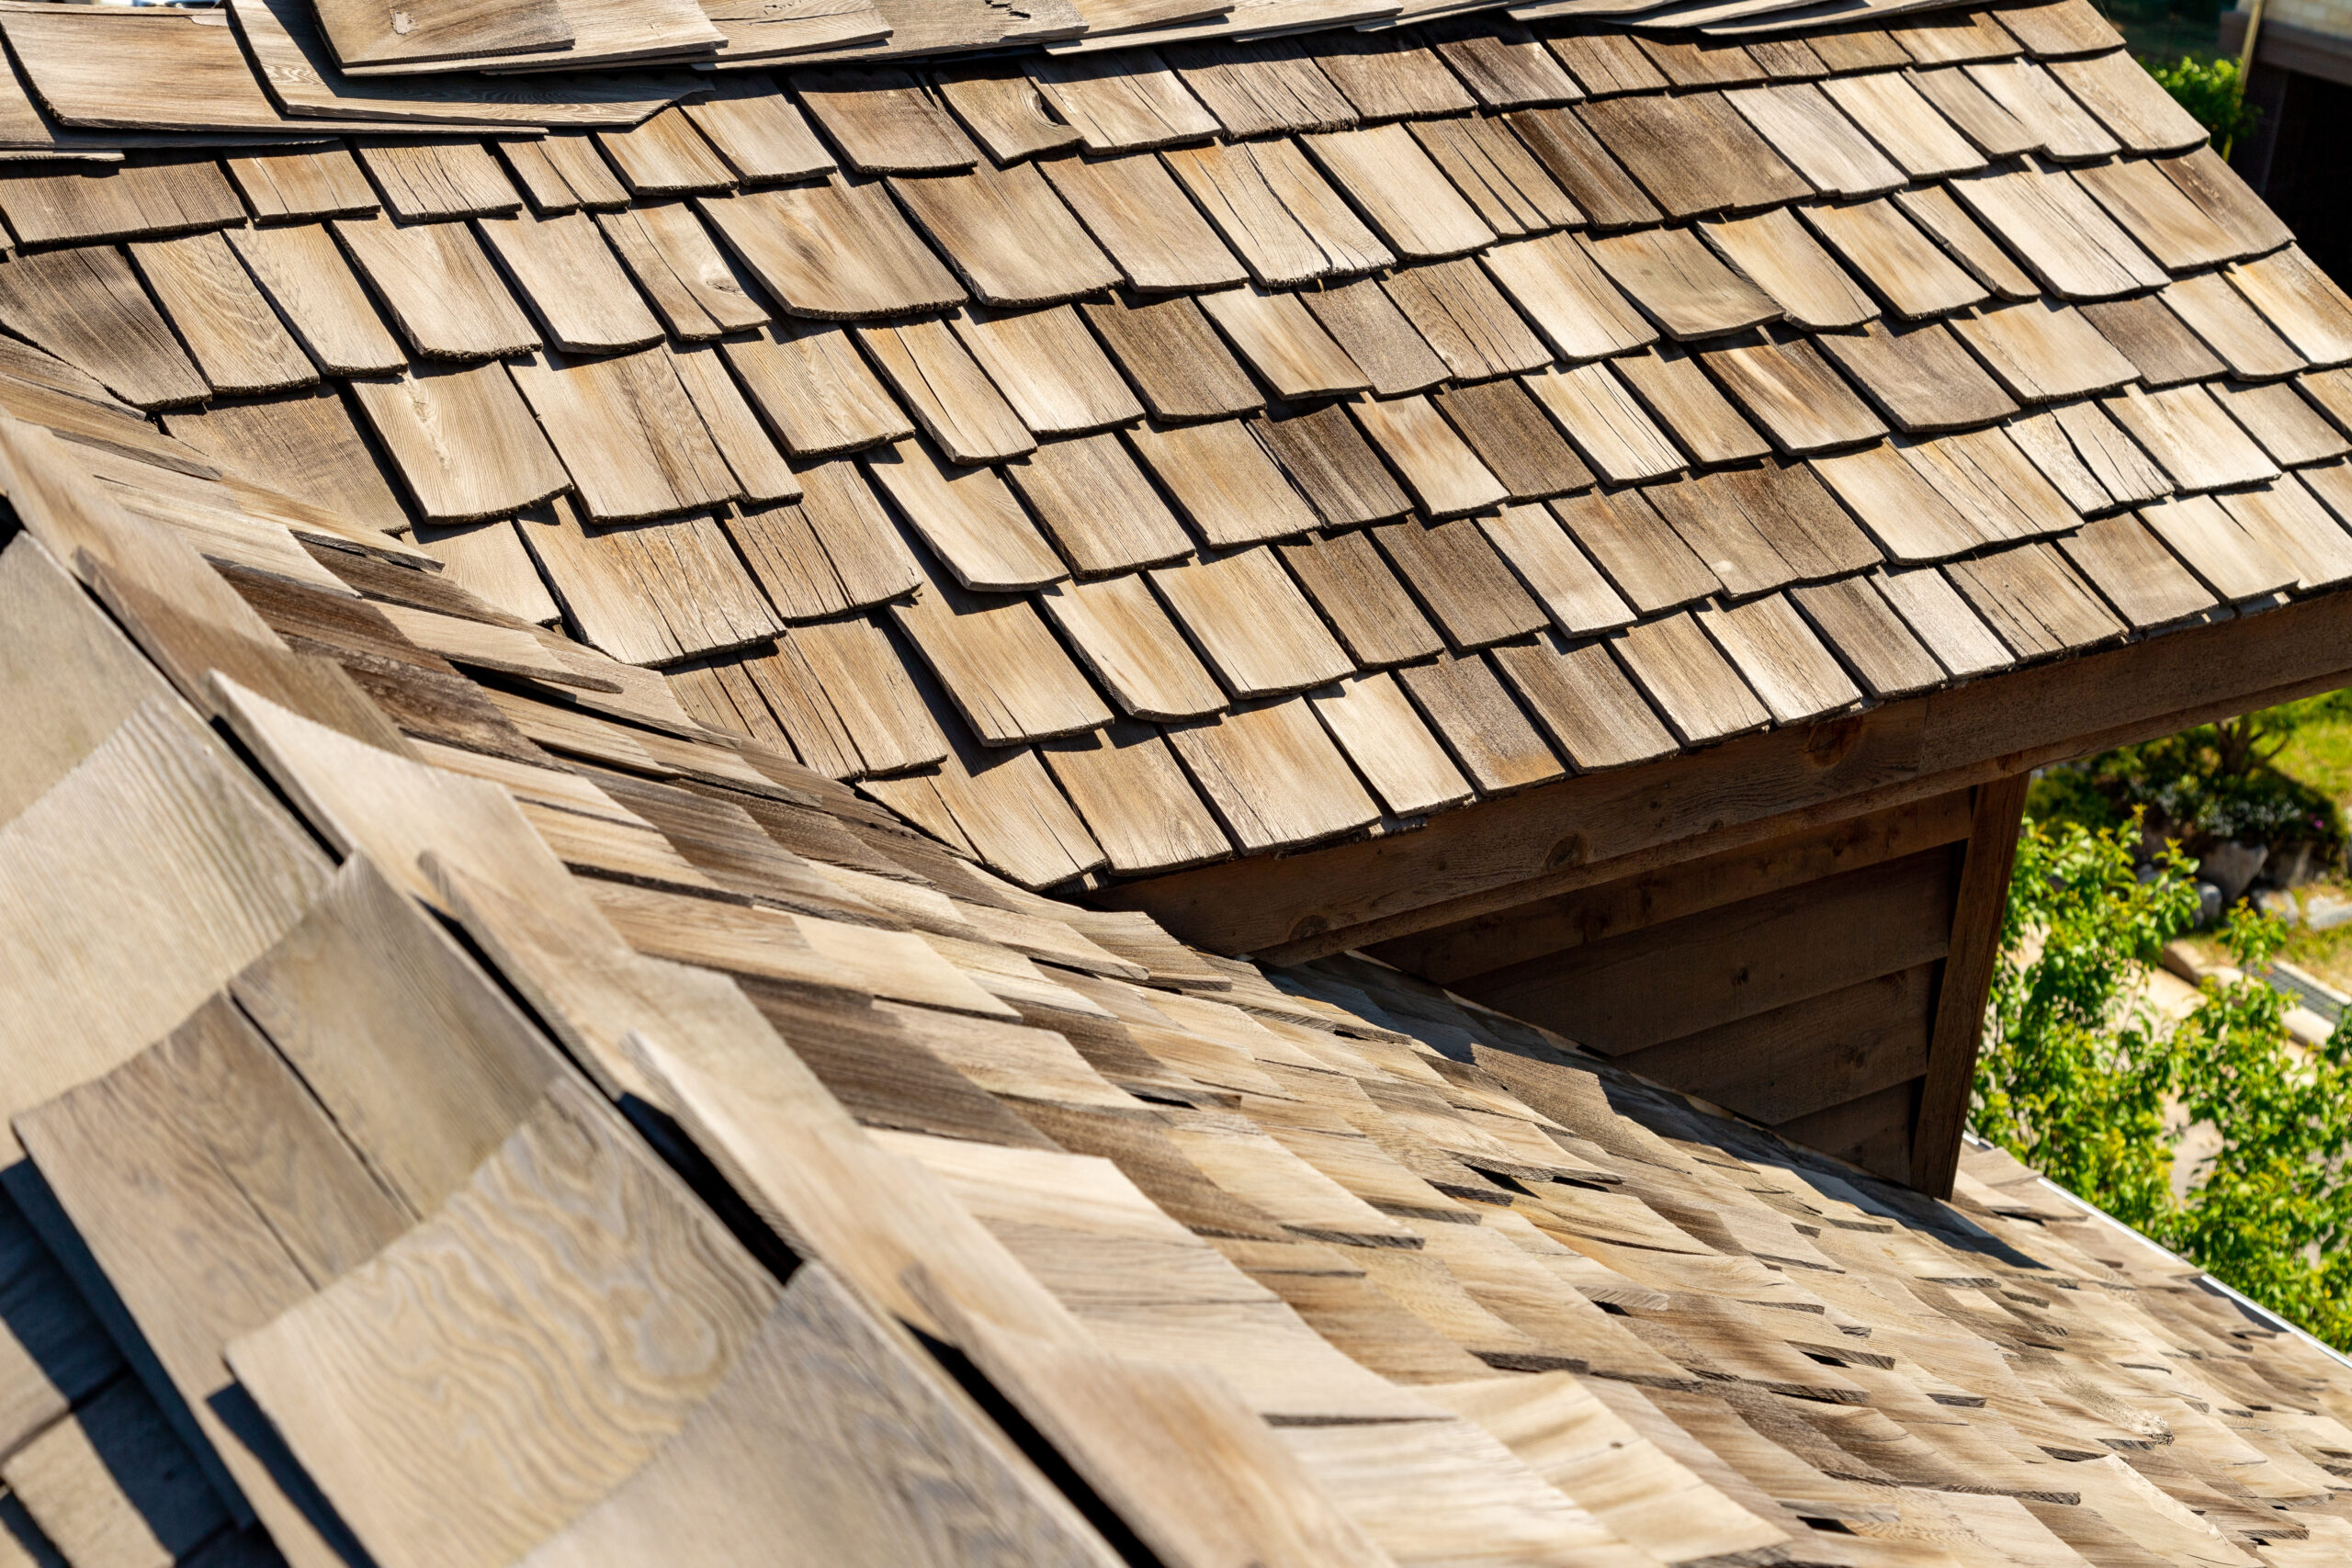 Redline Contracting provides expert cedar roofing installations in the greater Minneapolis metro area with many choices in colors to create a lasting, gorgeous roof.